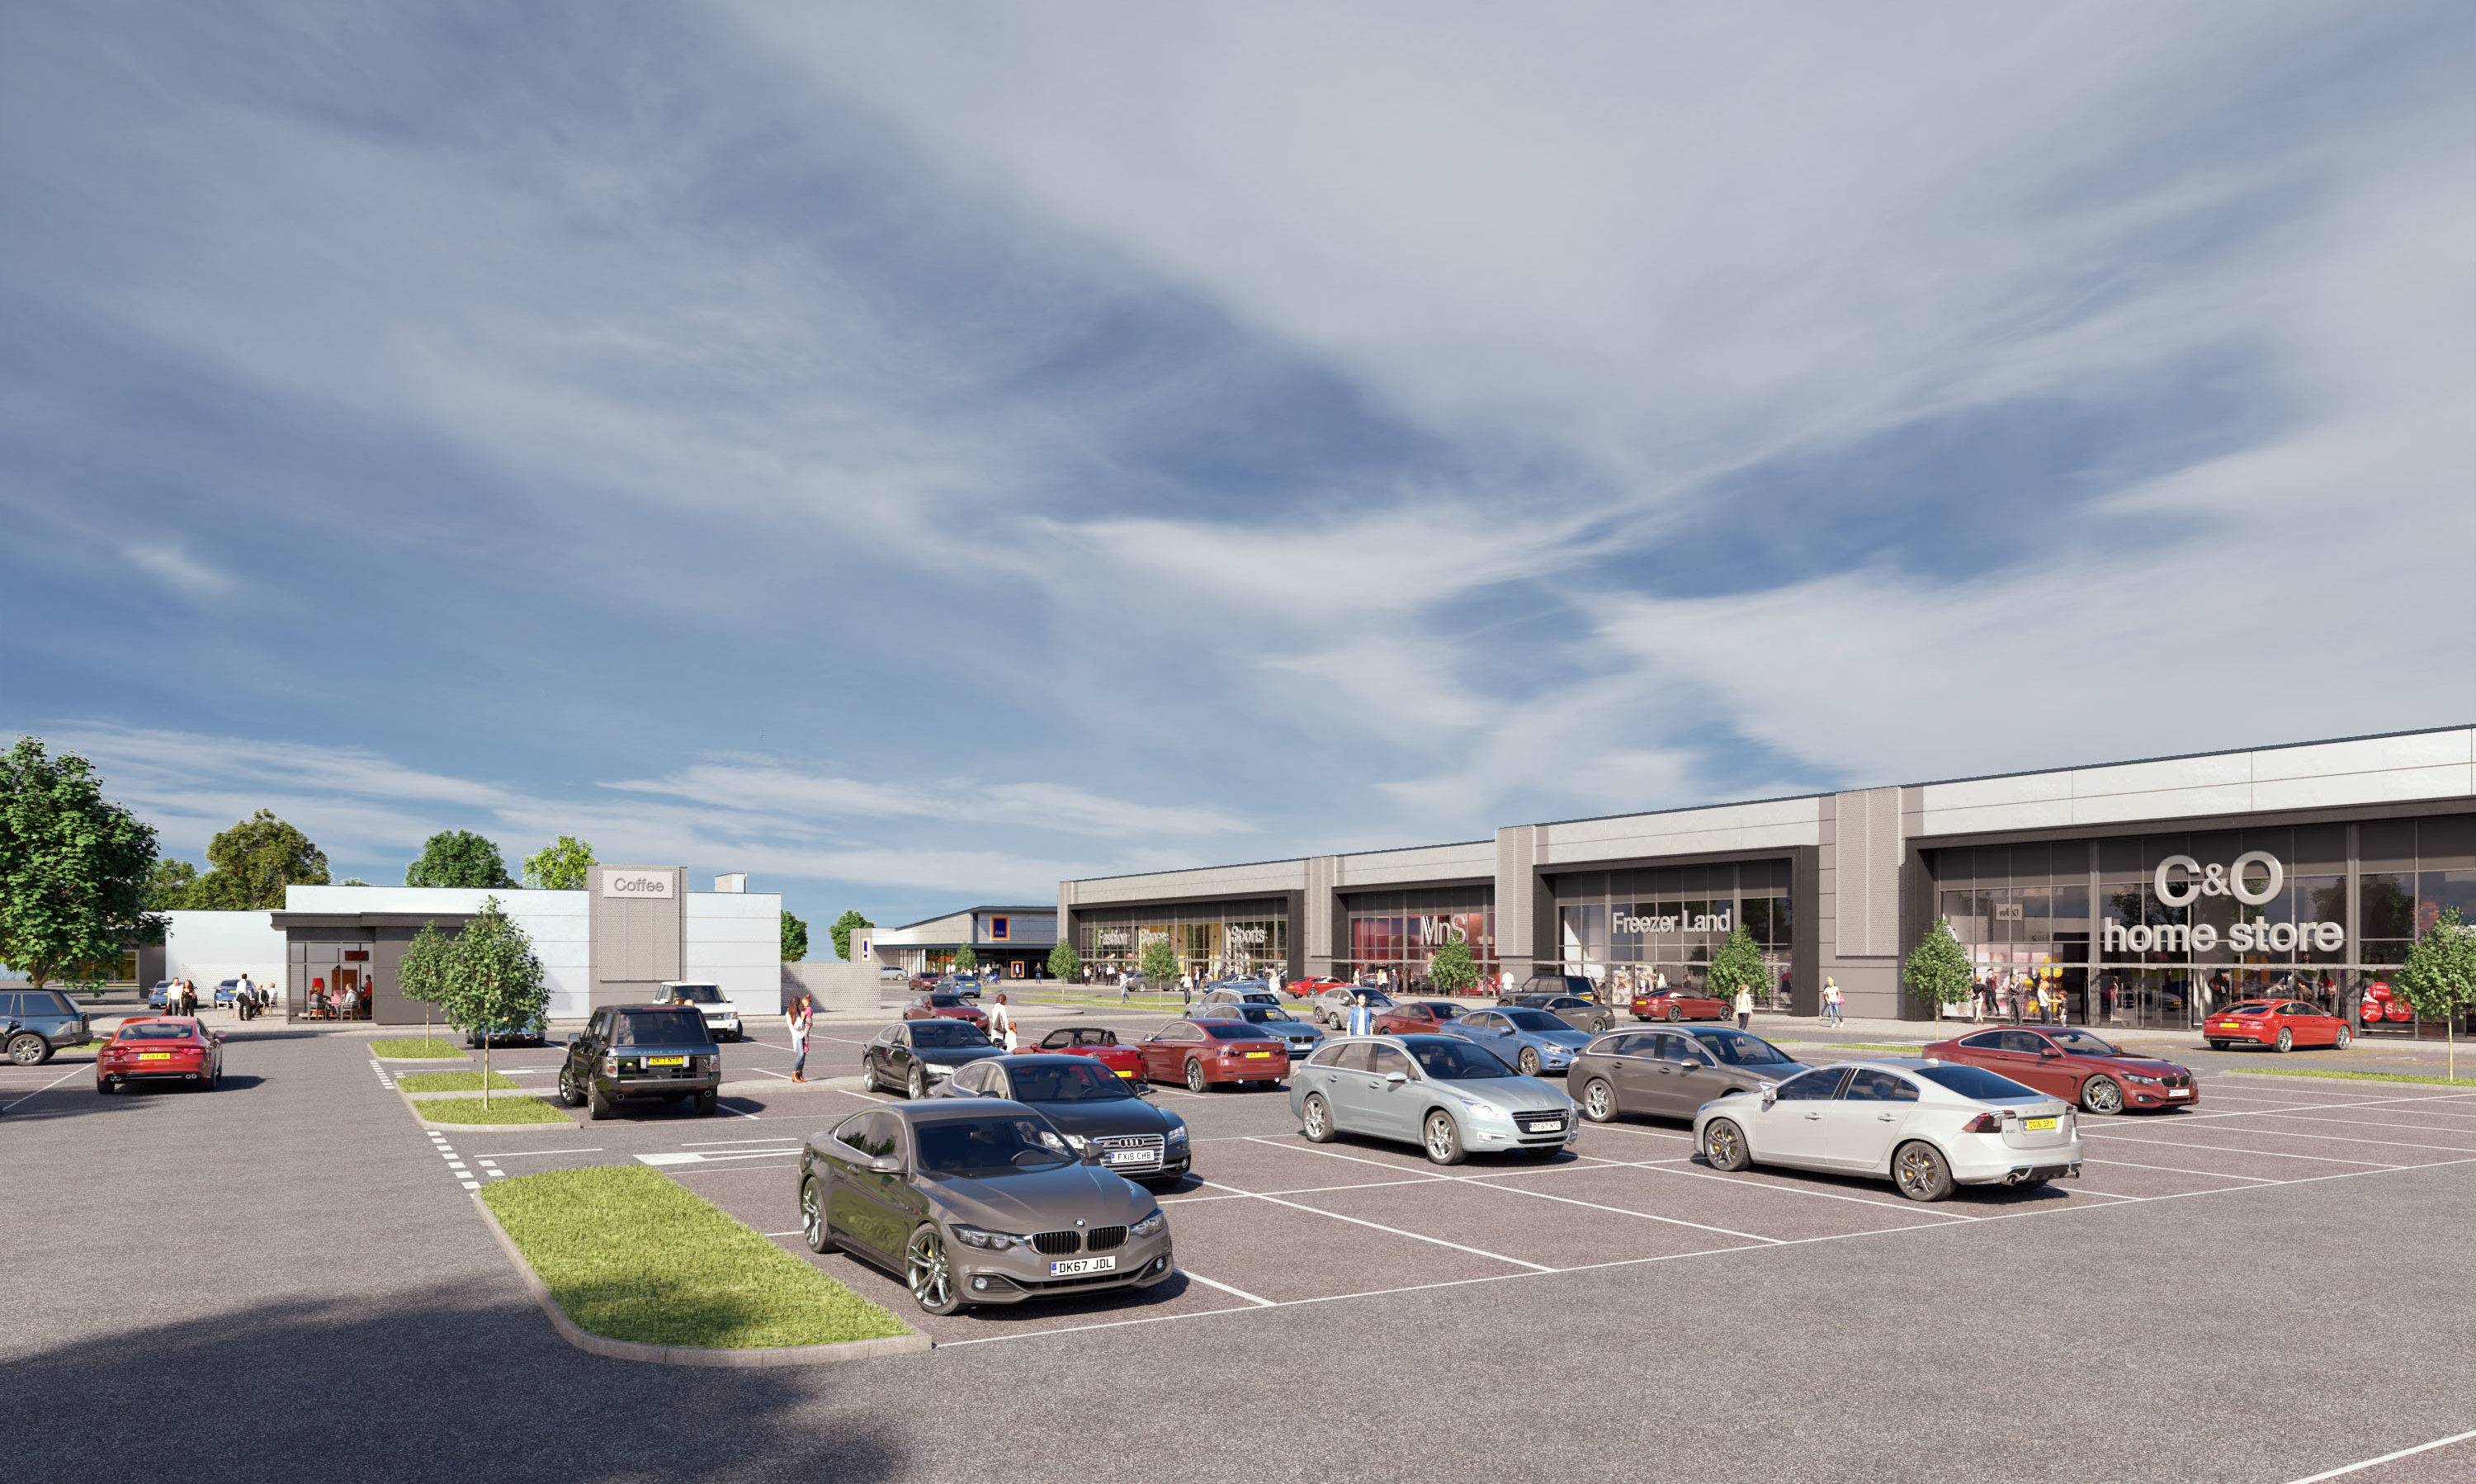 An artist impression of the retail park